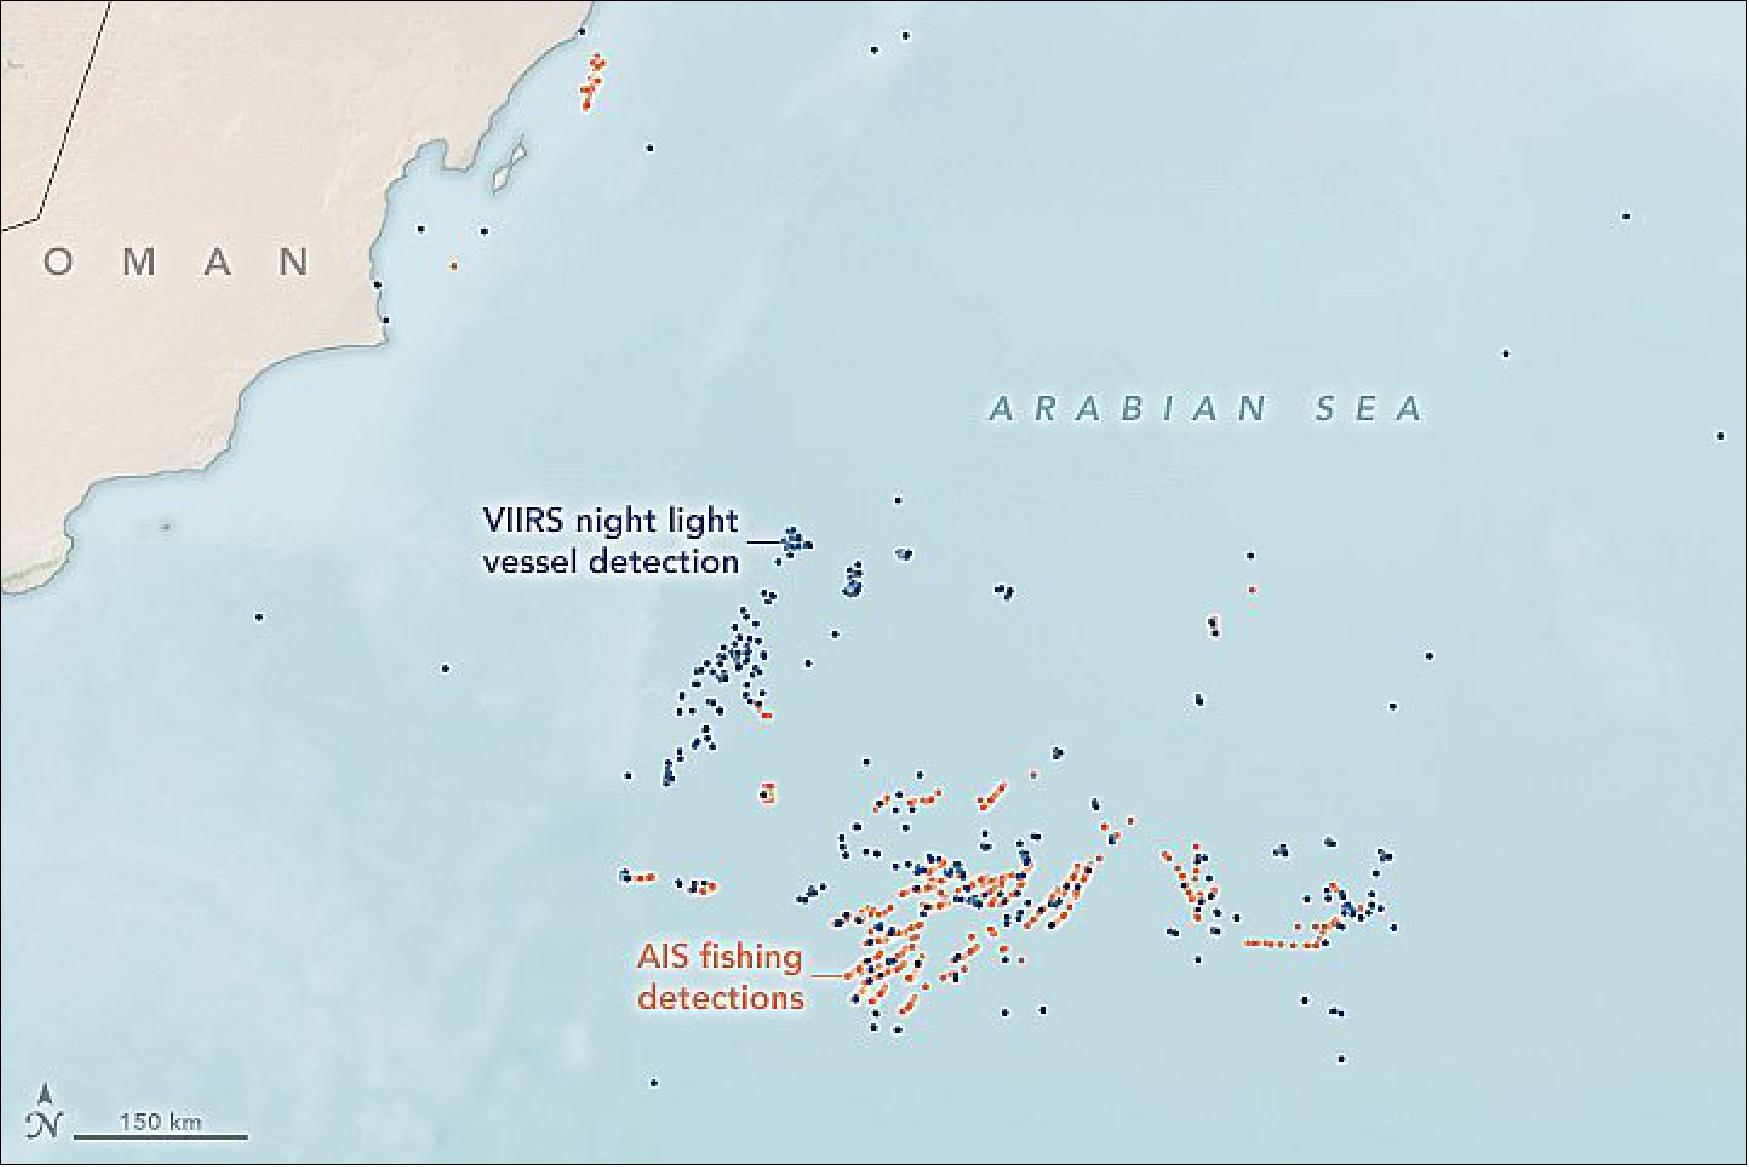 Figure 48: Vessel tracking starts with Automatic Identification System (AIS) transponders, which are designed to prevent collisions at sea by constantly transmitting a ship's location, and vessel monitoring systems (VMS), which are designed for fisheries monitoring and surveillance. The International Maritime Organization has mandated that all ships larger than 300 gross tons must use the AIS system while traveling internationally. The signals are collected by satellite and broadcast to mariners and shipping agencies. This image was acquired on 17 December 2020 with VIIRS and annotated with AIS fishing detections (image credit: NASA Earth Observatory)